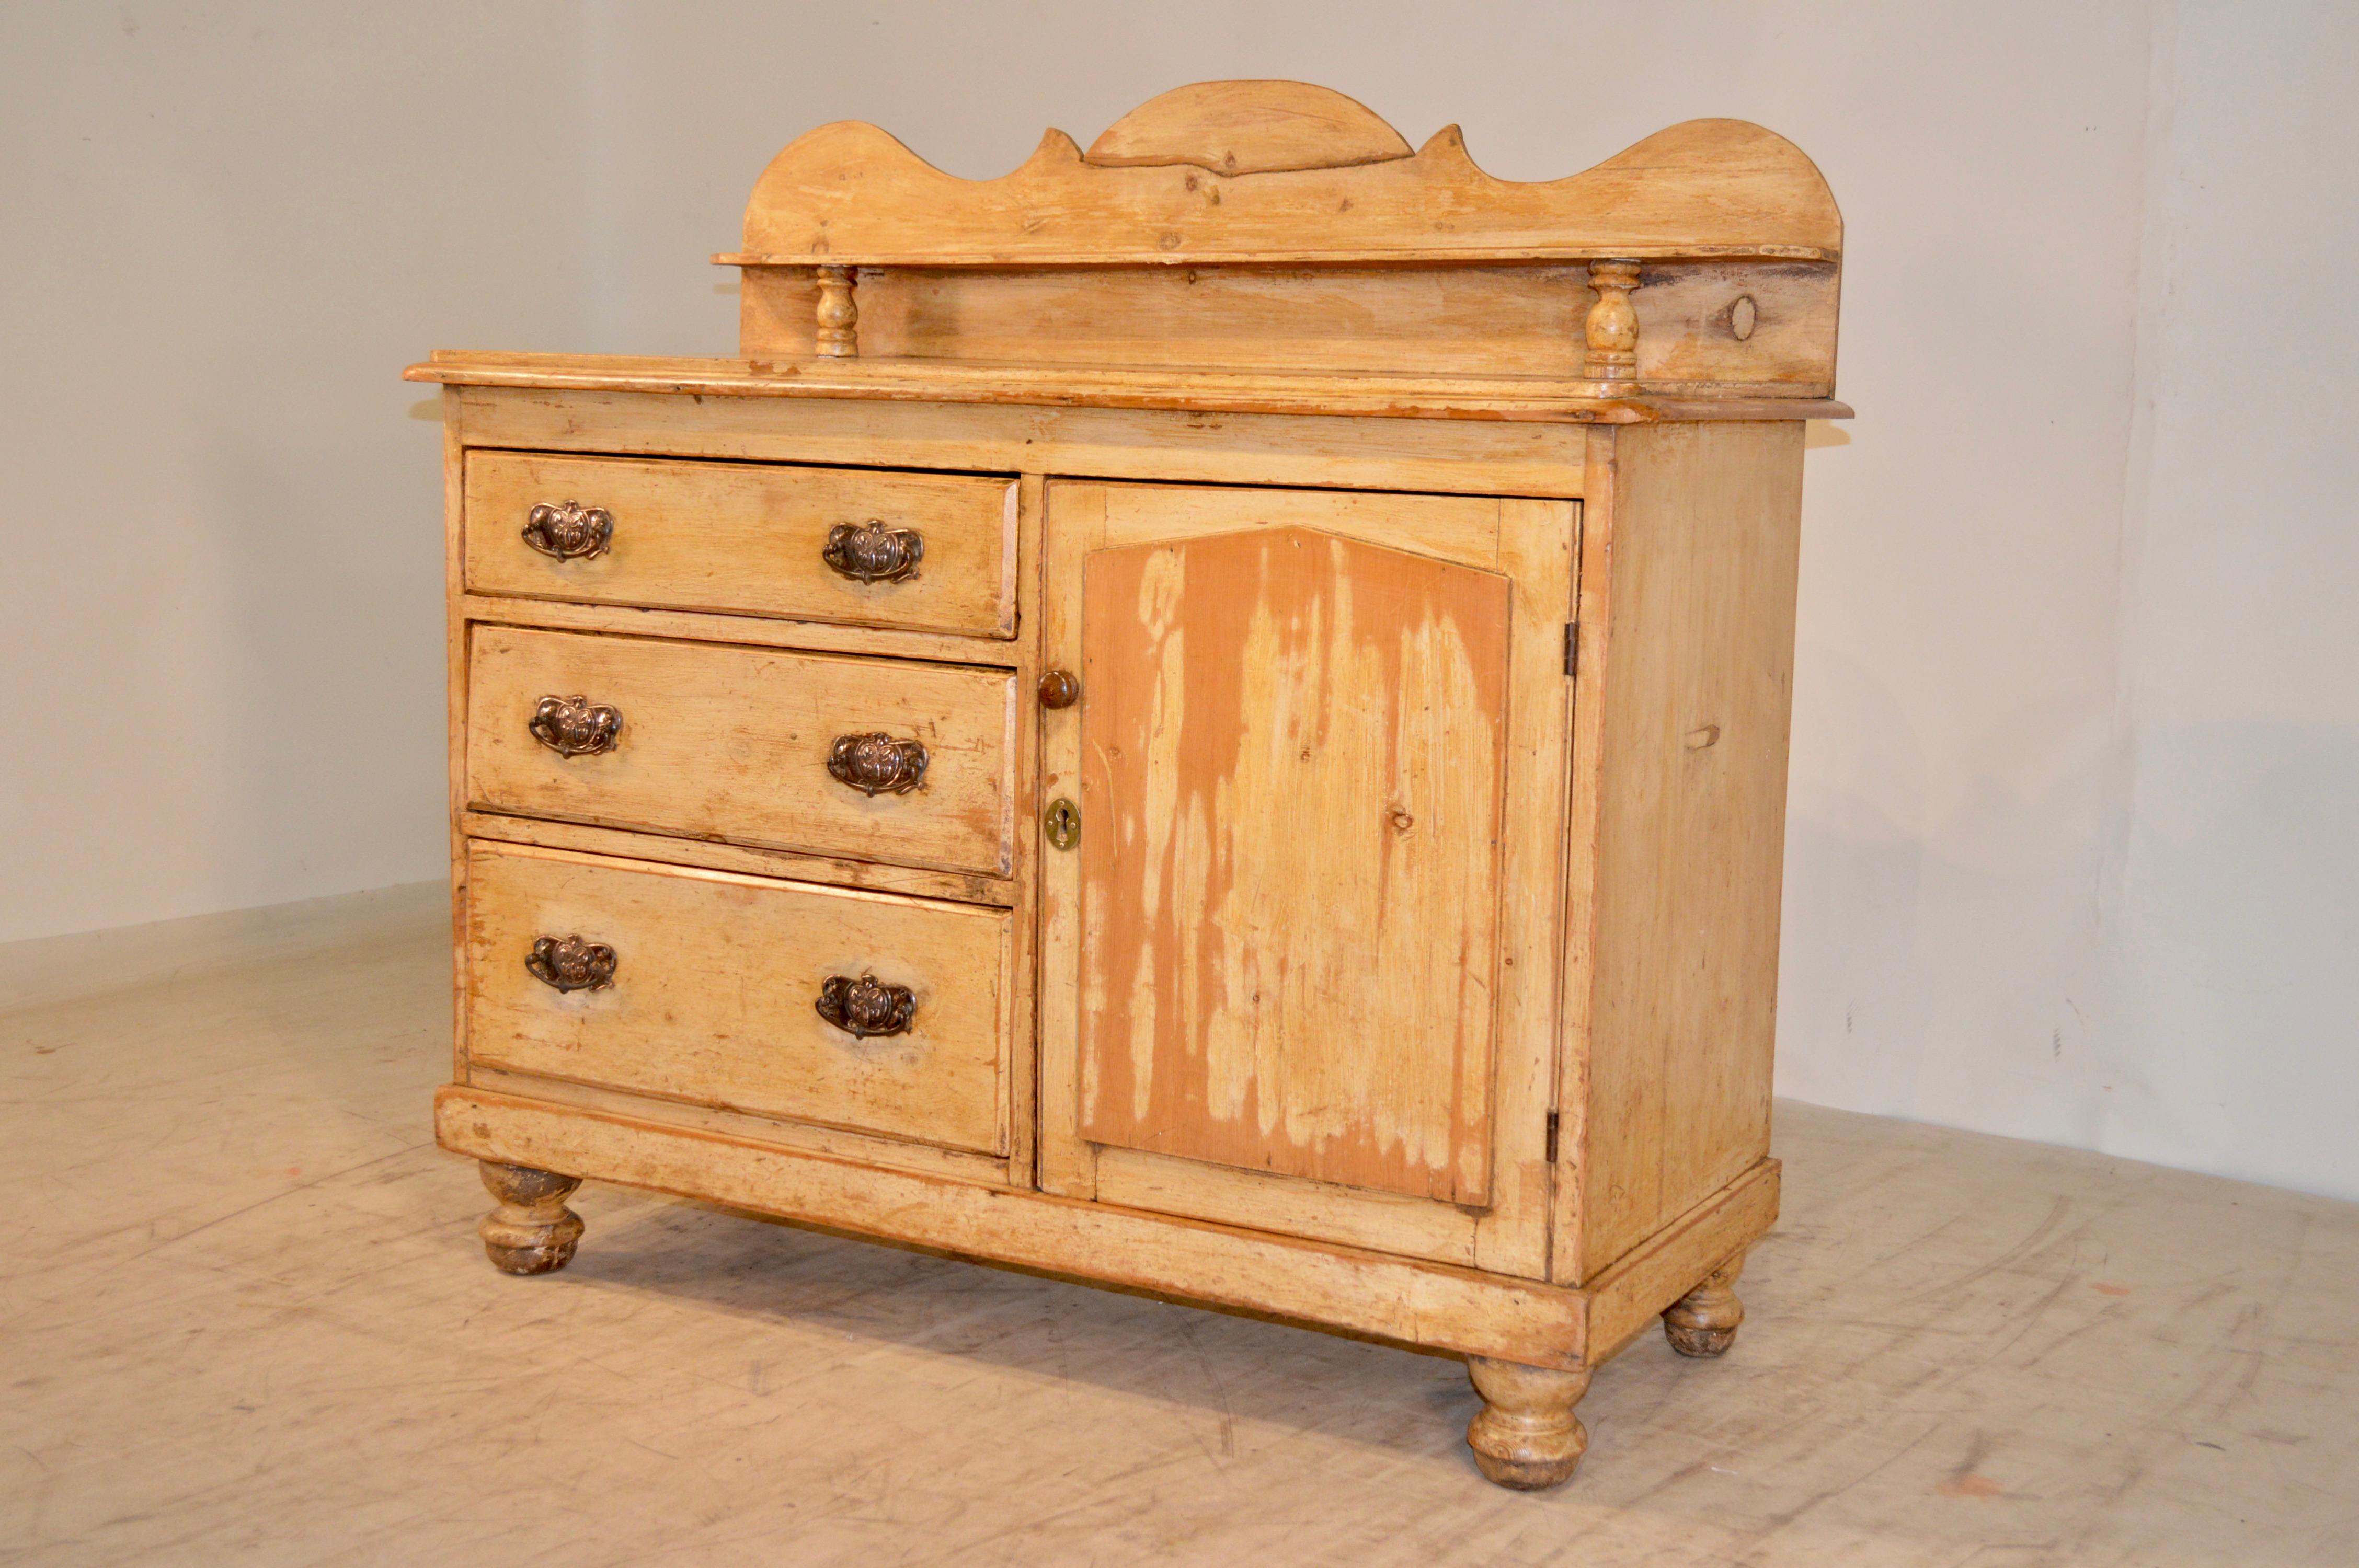 Late 19th century English pine buffet with original yellow paint finish. The backsplash is scalloped and has an old repair. There is a small shelf attached to the backsplash and the top has a beveled edge around the top. The case contains three